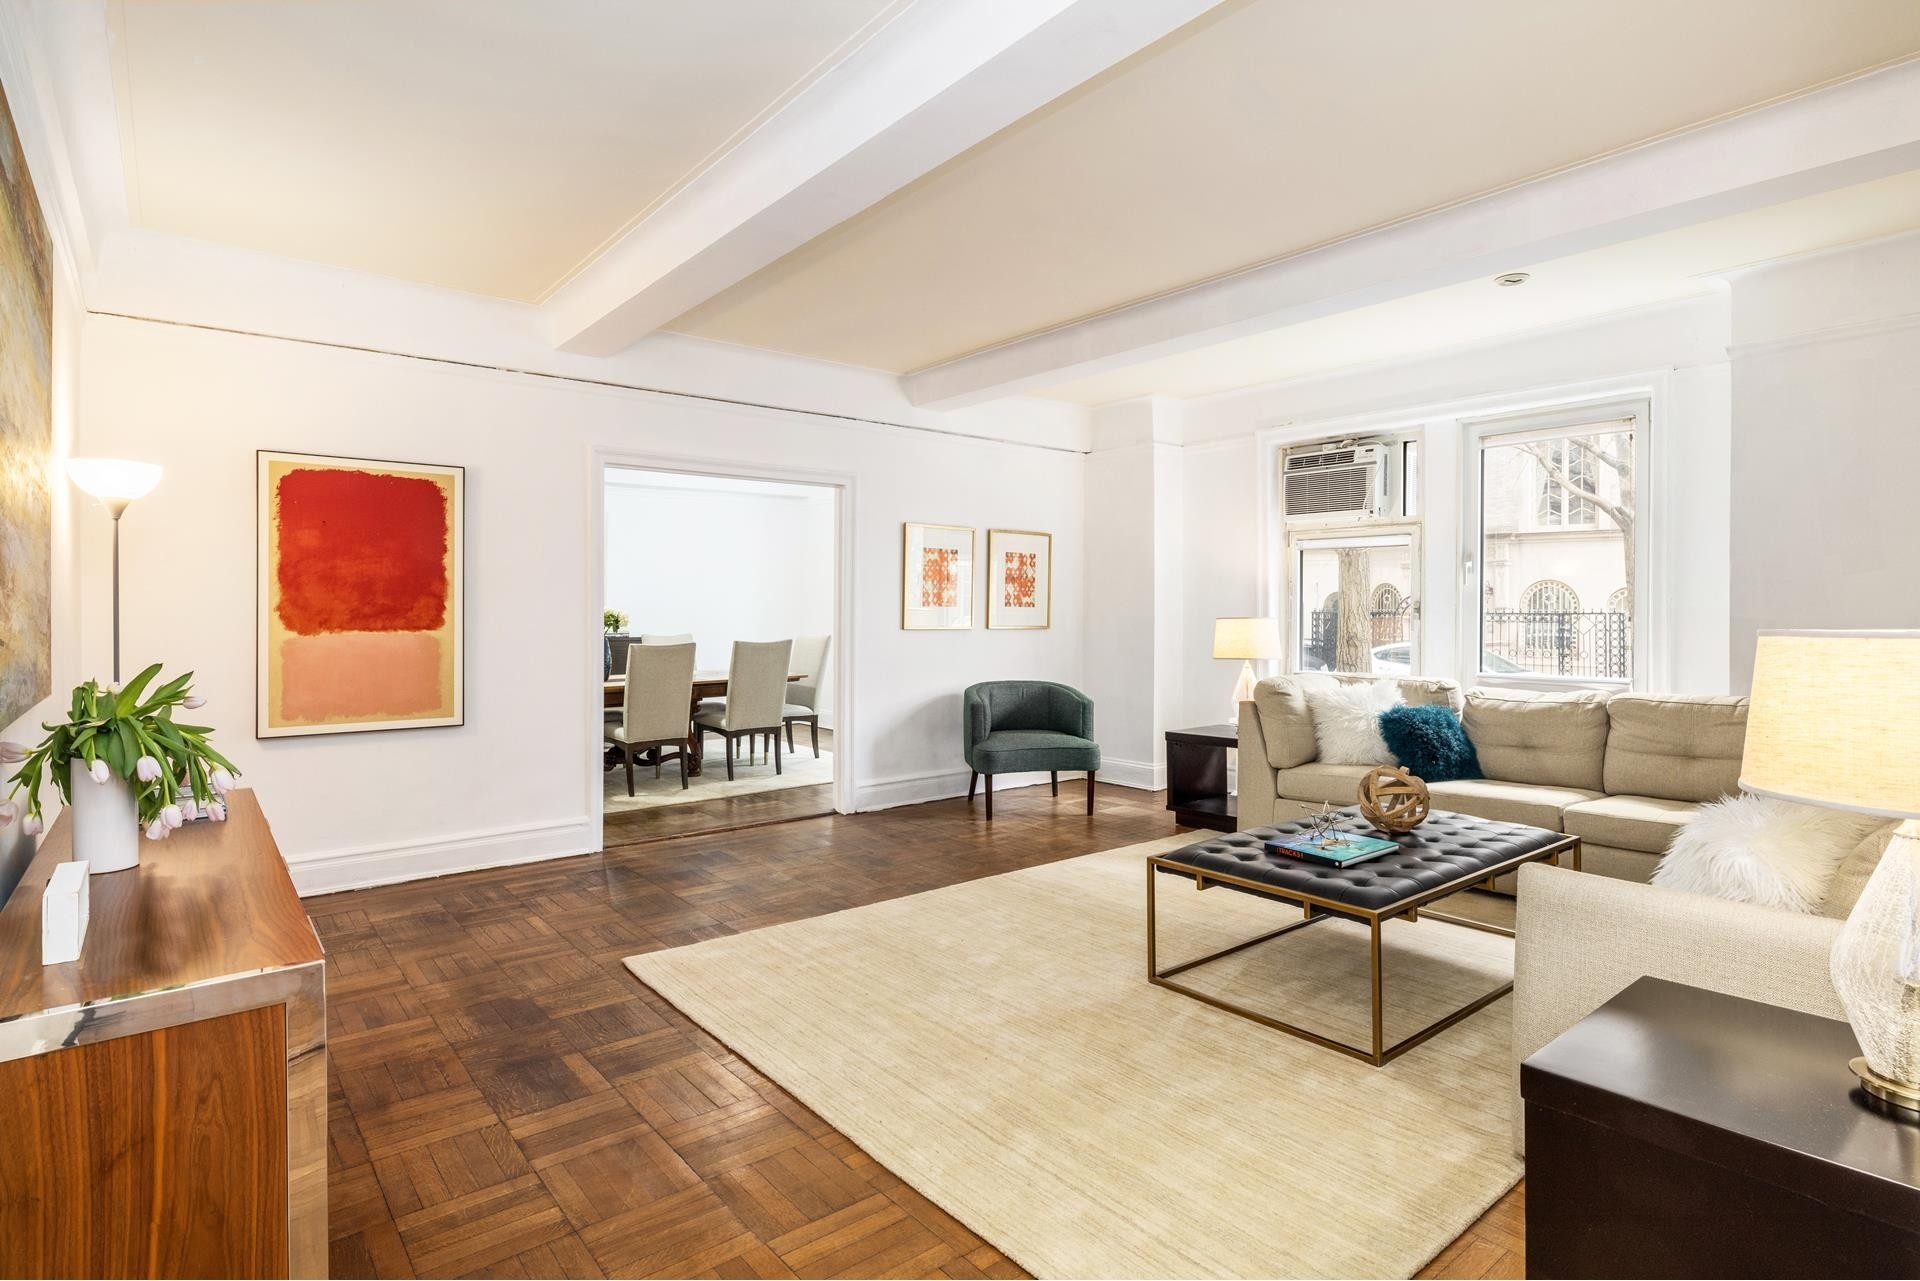 Co-op Properties for Sale at 90 RIVERSIDE DR, 1B Upper West Side, New York, NY 10024